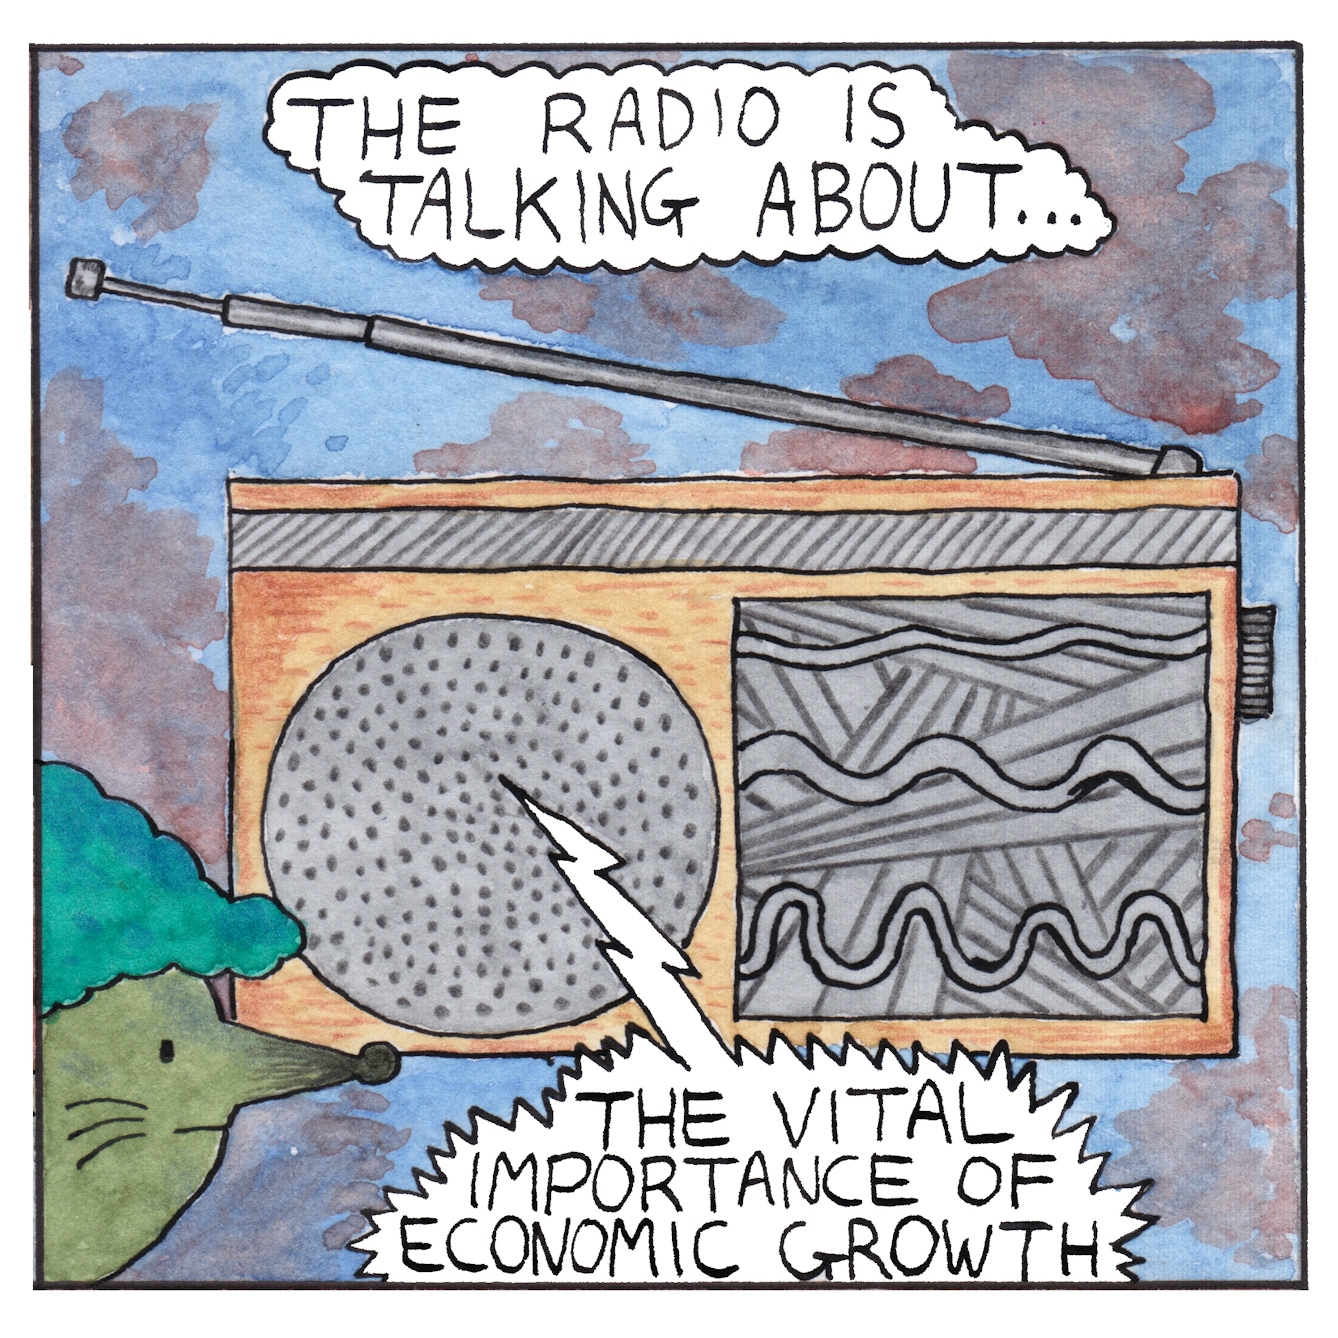 Panel 2 of a six-panel comic made with ink, watercolour and colour pencils: Most of the frame is filled with a large traditional, rectangular radio with a slightly extended aerial on top. The mouse’s face, in profile, peers into the bottom left of the frame, attentive and listening. A text bubble above the radio reads: “The radio is talking about…” and a spikey speech bubble coming from the radio speaker says “The vital importance of economic growth”